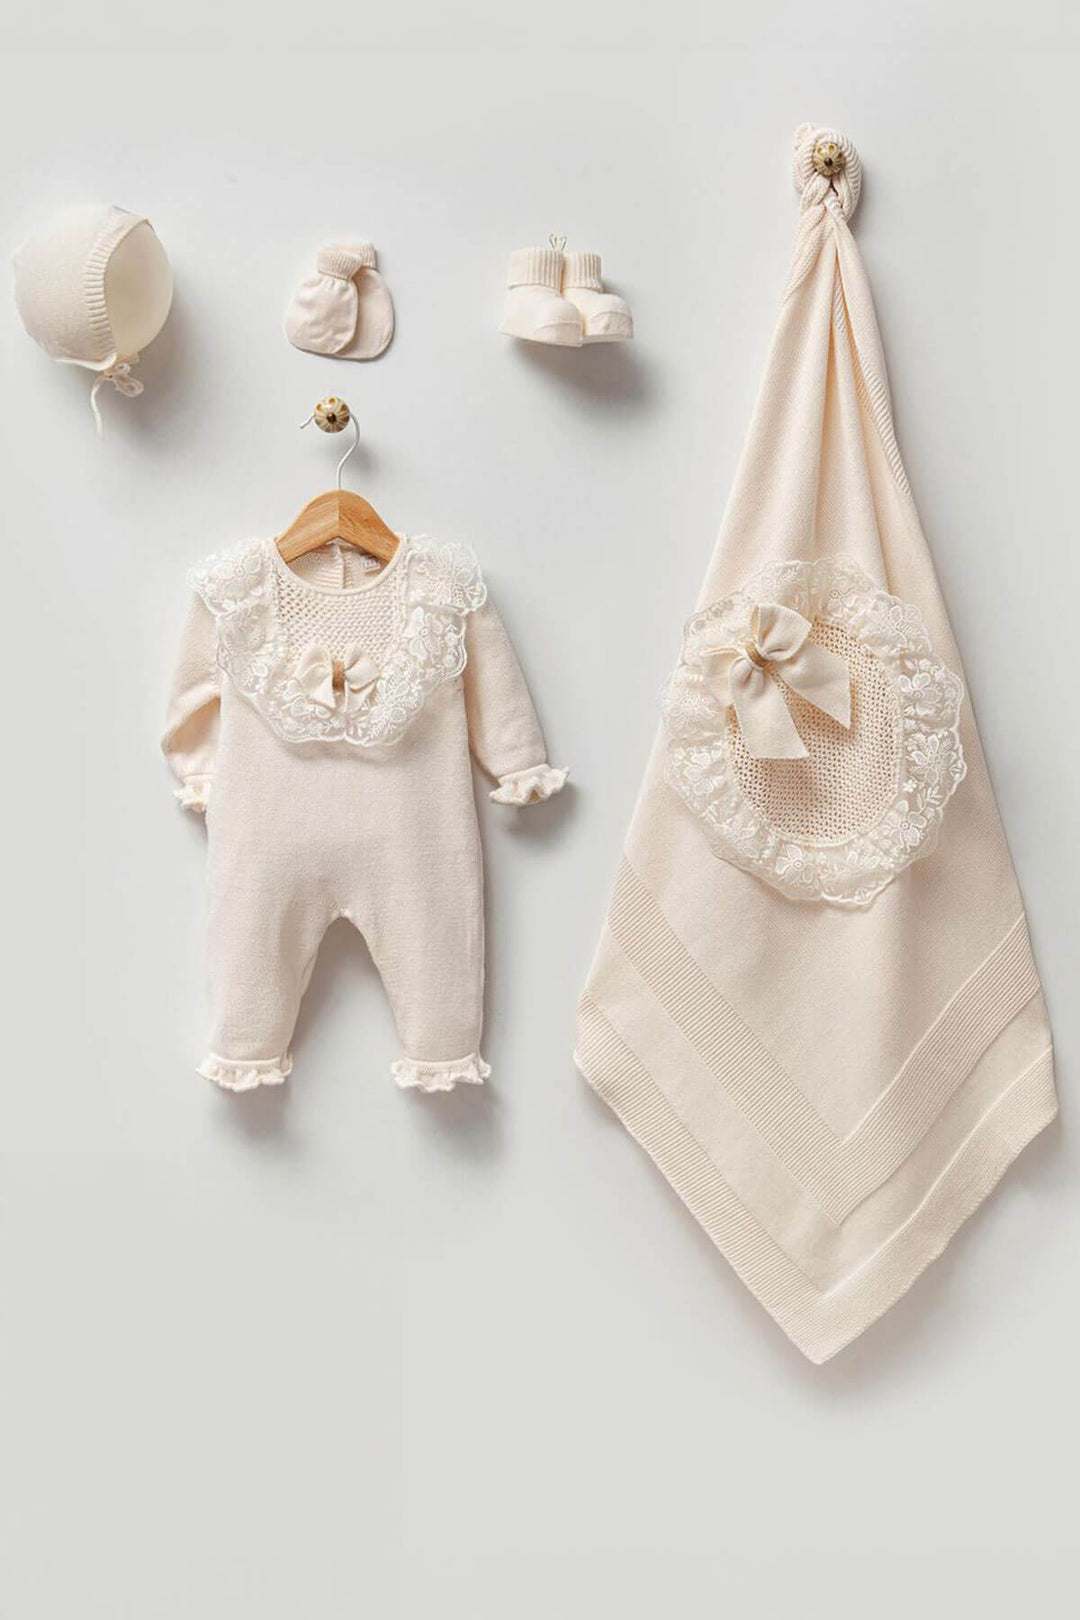 newborn knitwear hospital exit outfit baby